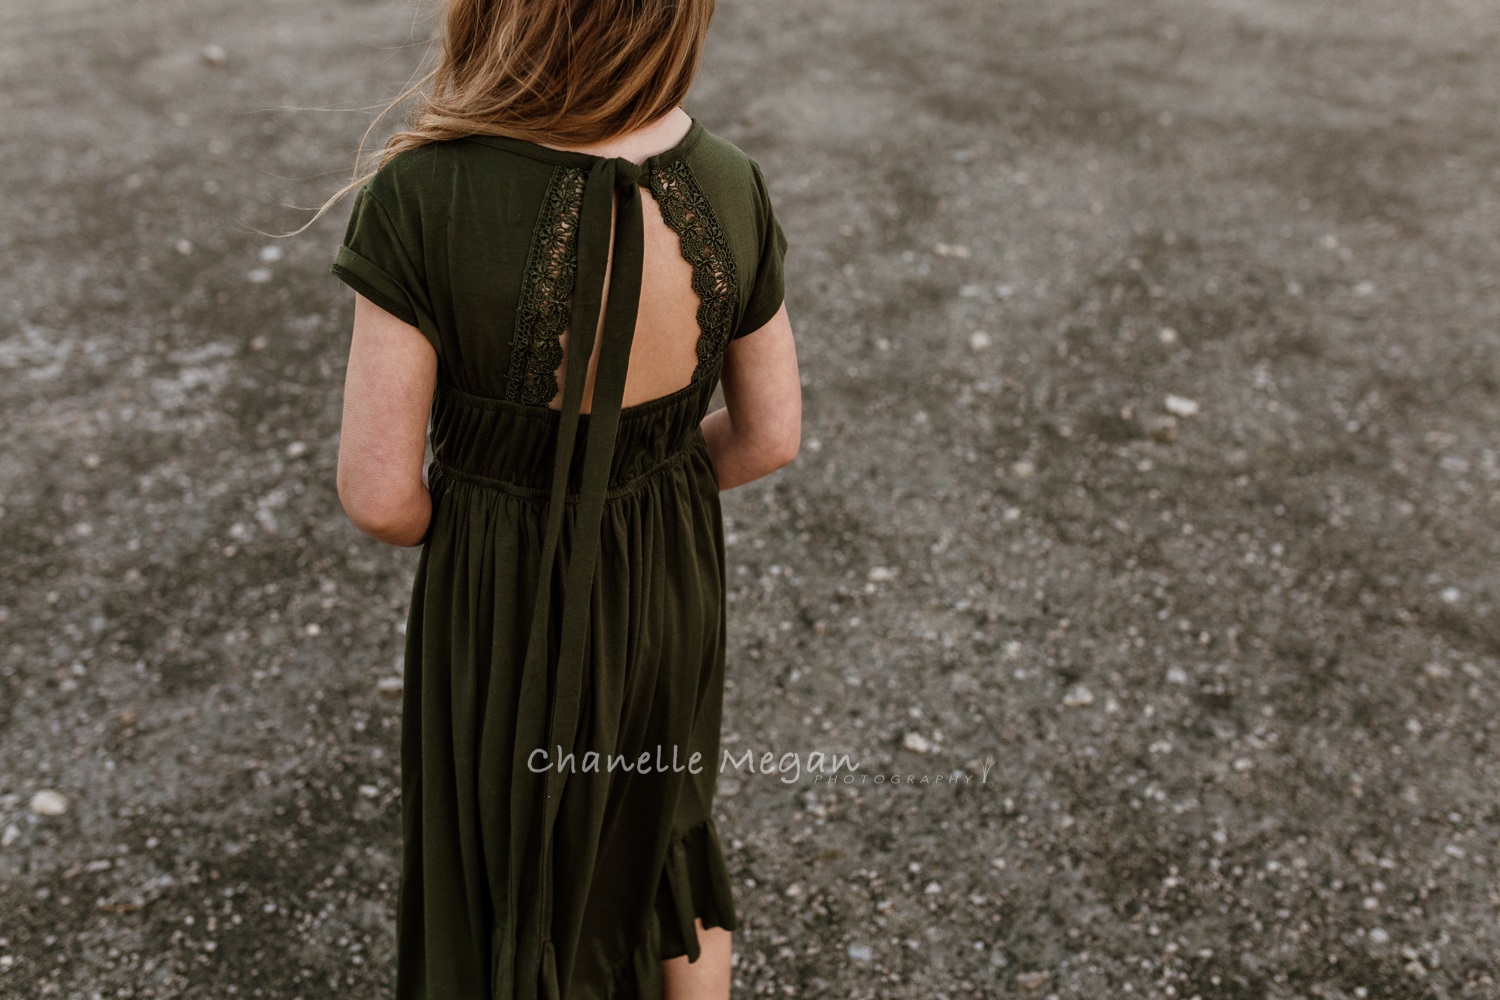 Capturing the details of your kids childhood, Chanelle Megan Photography demonstrates this through a travelling dress that passed through Perth